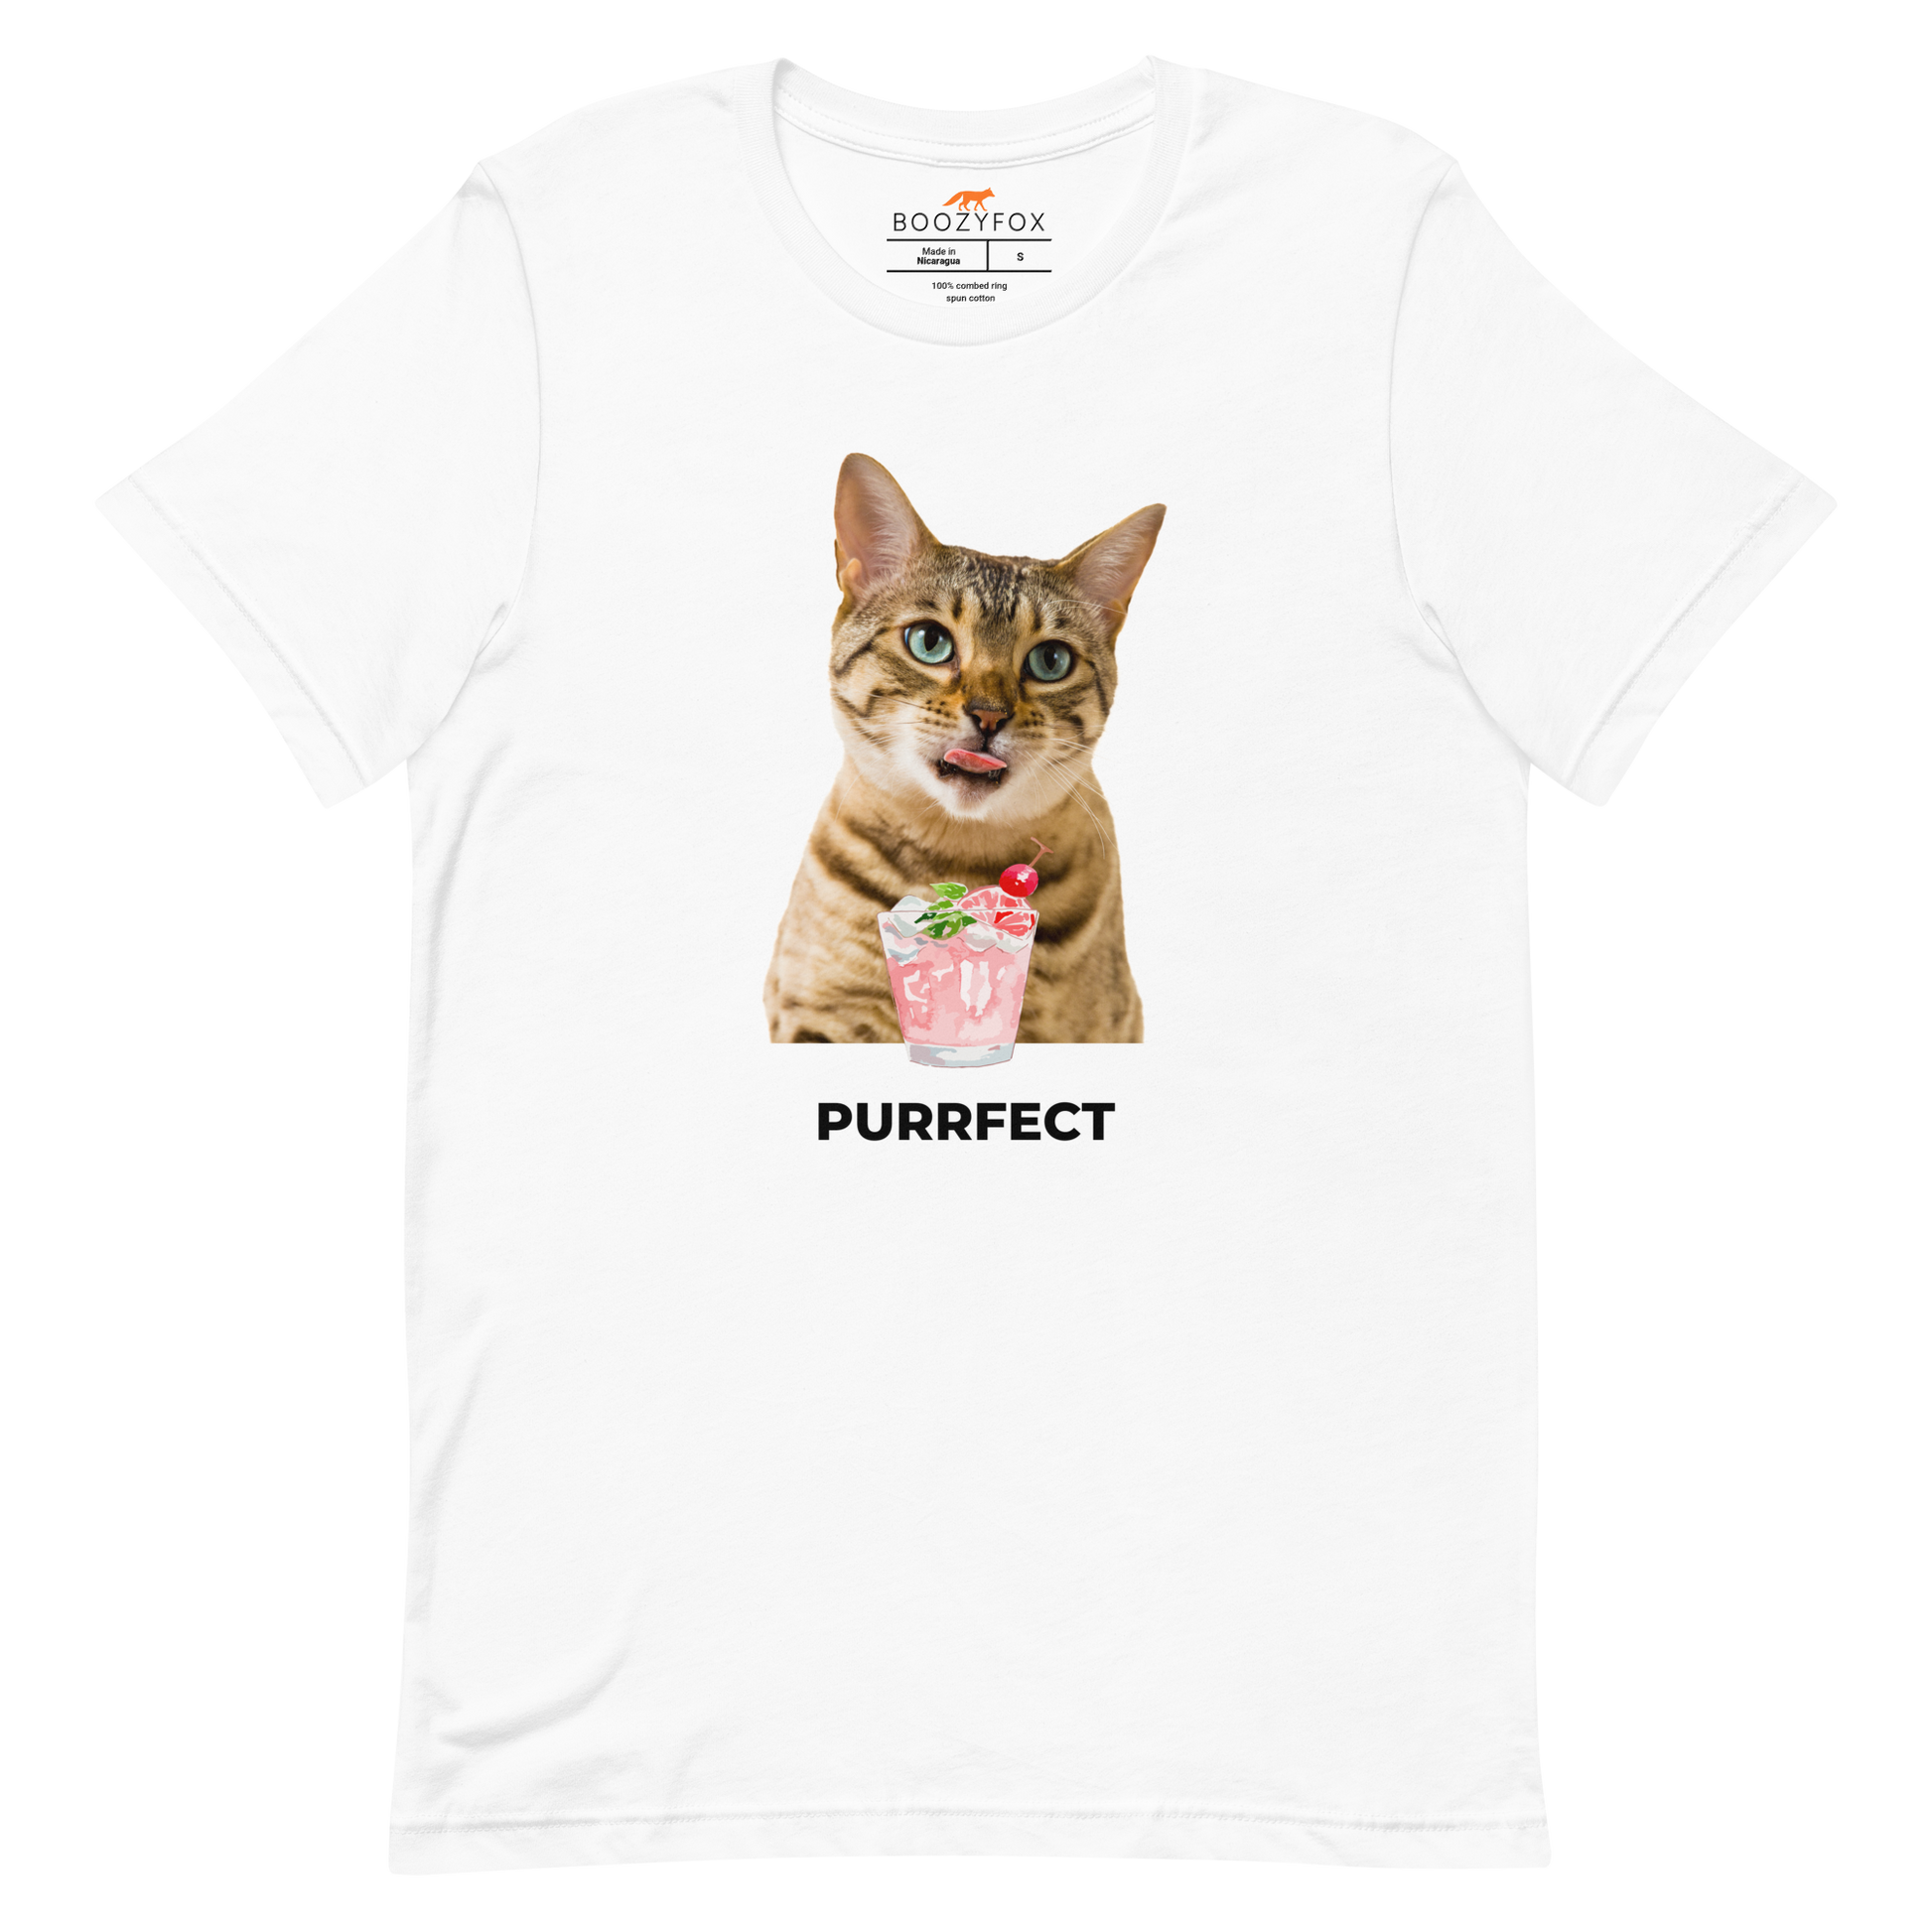 White Premium Cat T-Shirt featuring a Purrfect graphic on the chest - Funny Graphic Cat Tees - Boozy Fox